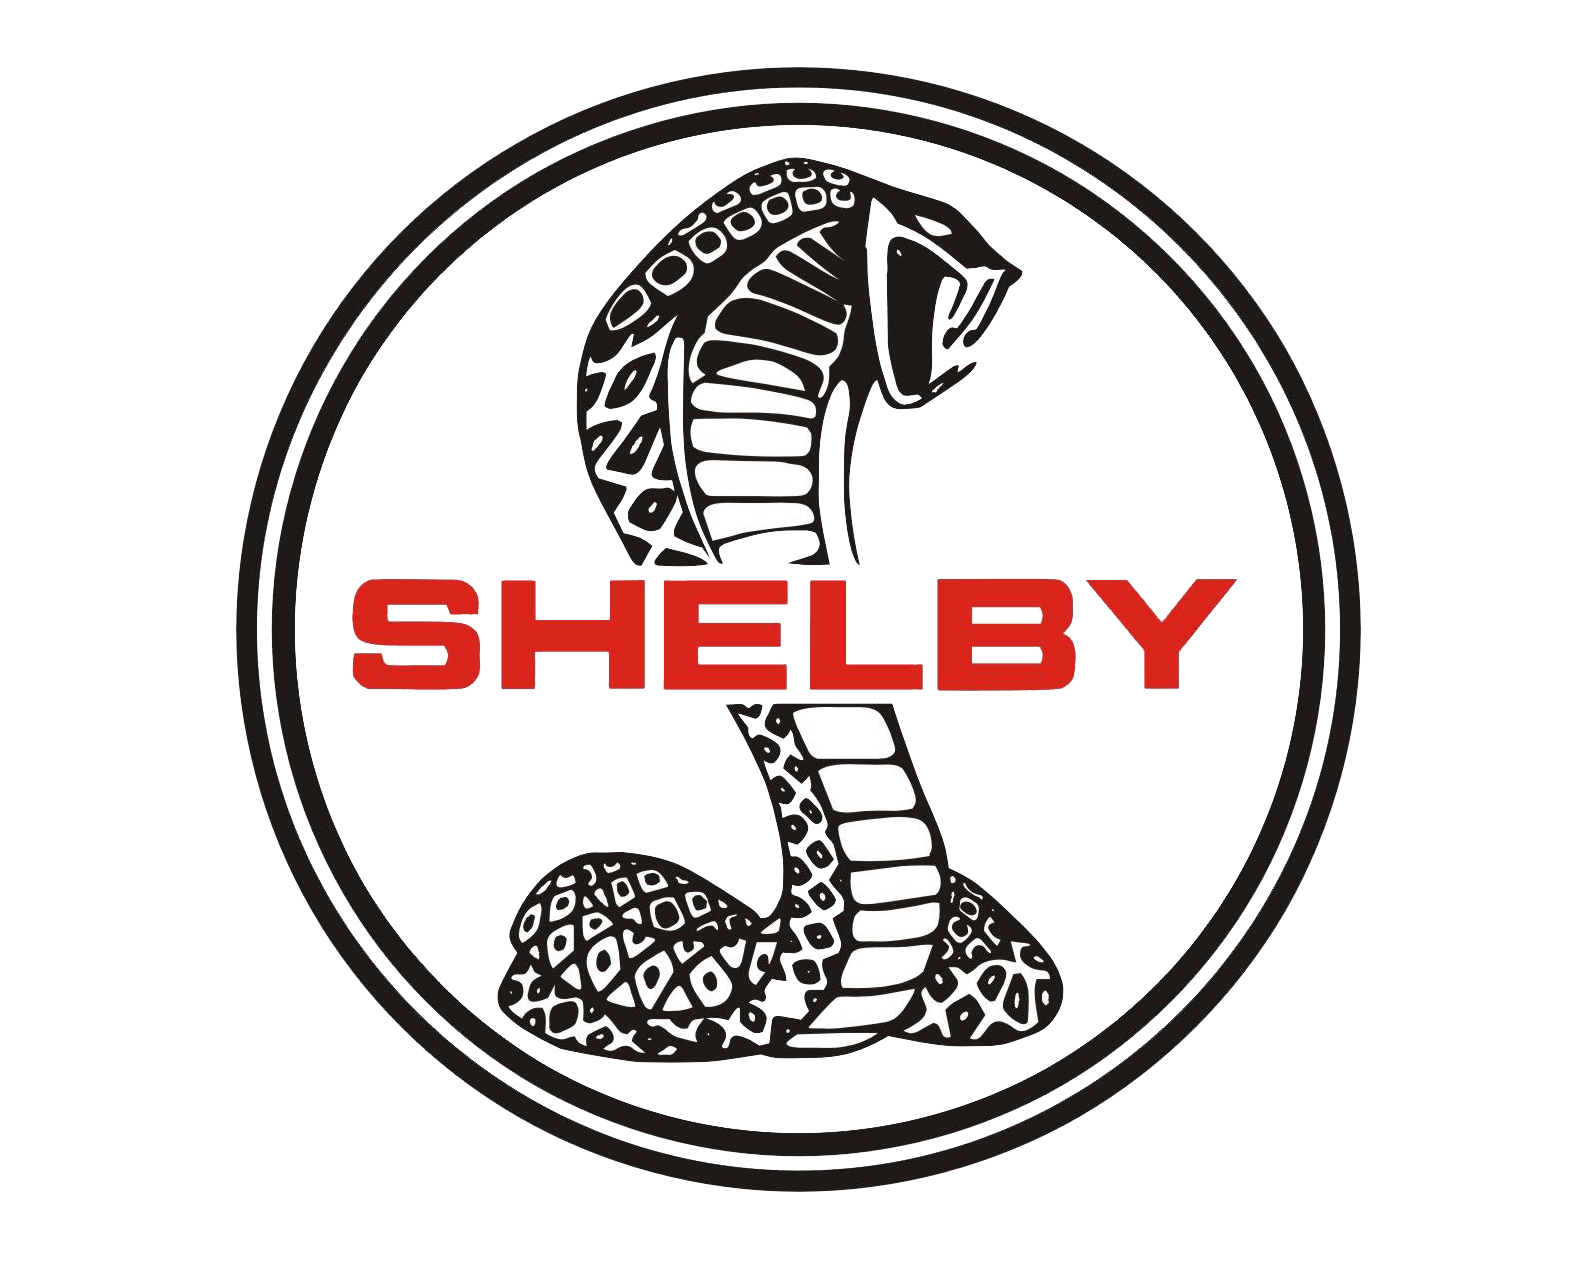 Shelby Logo and Car Symbol Meaning